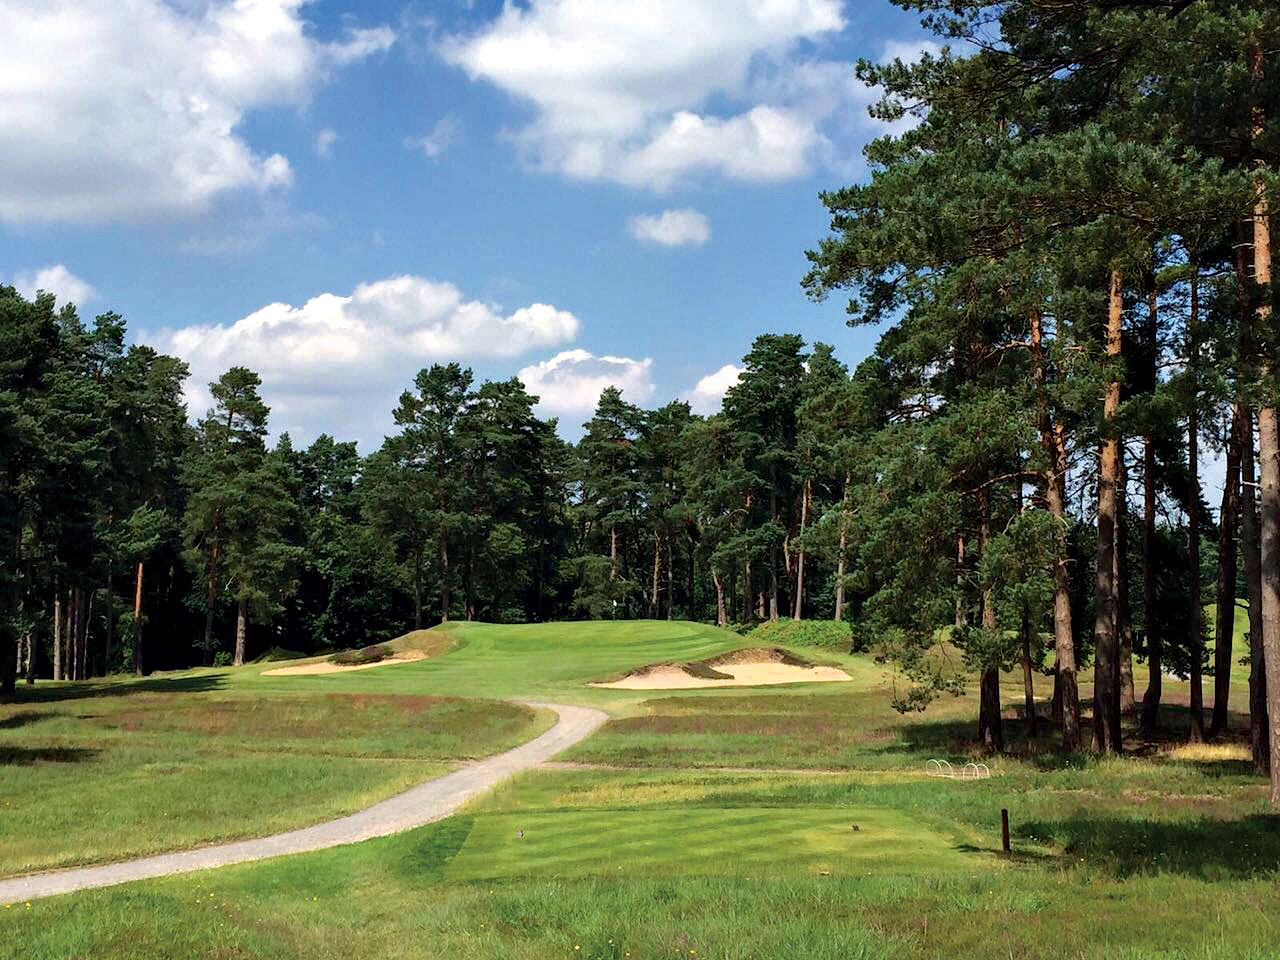 Swinley-Forest-hole-17-low-res